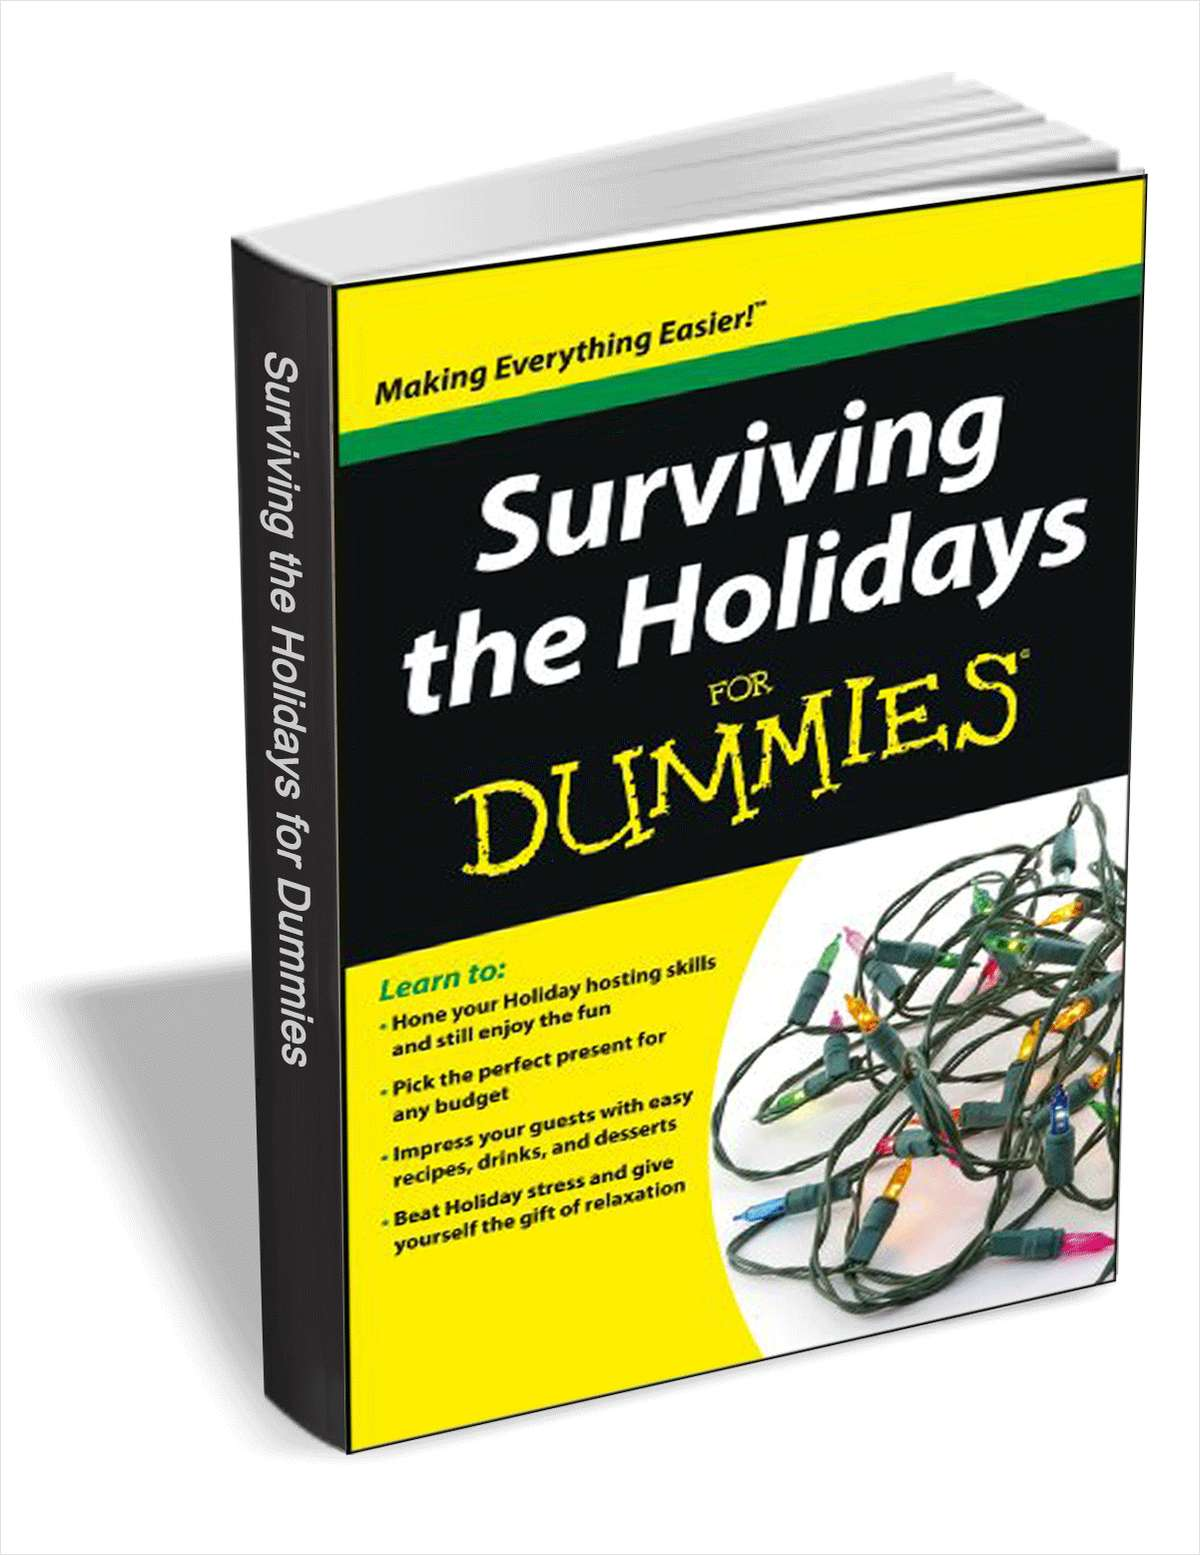 Surviving the Holidays For Dummies ($0.99 Value) FREE For a Limited Time Screenshot